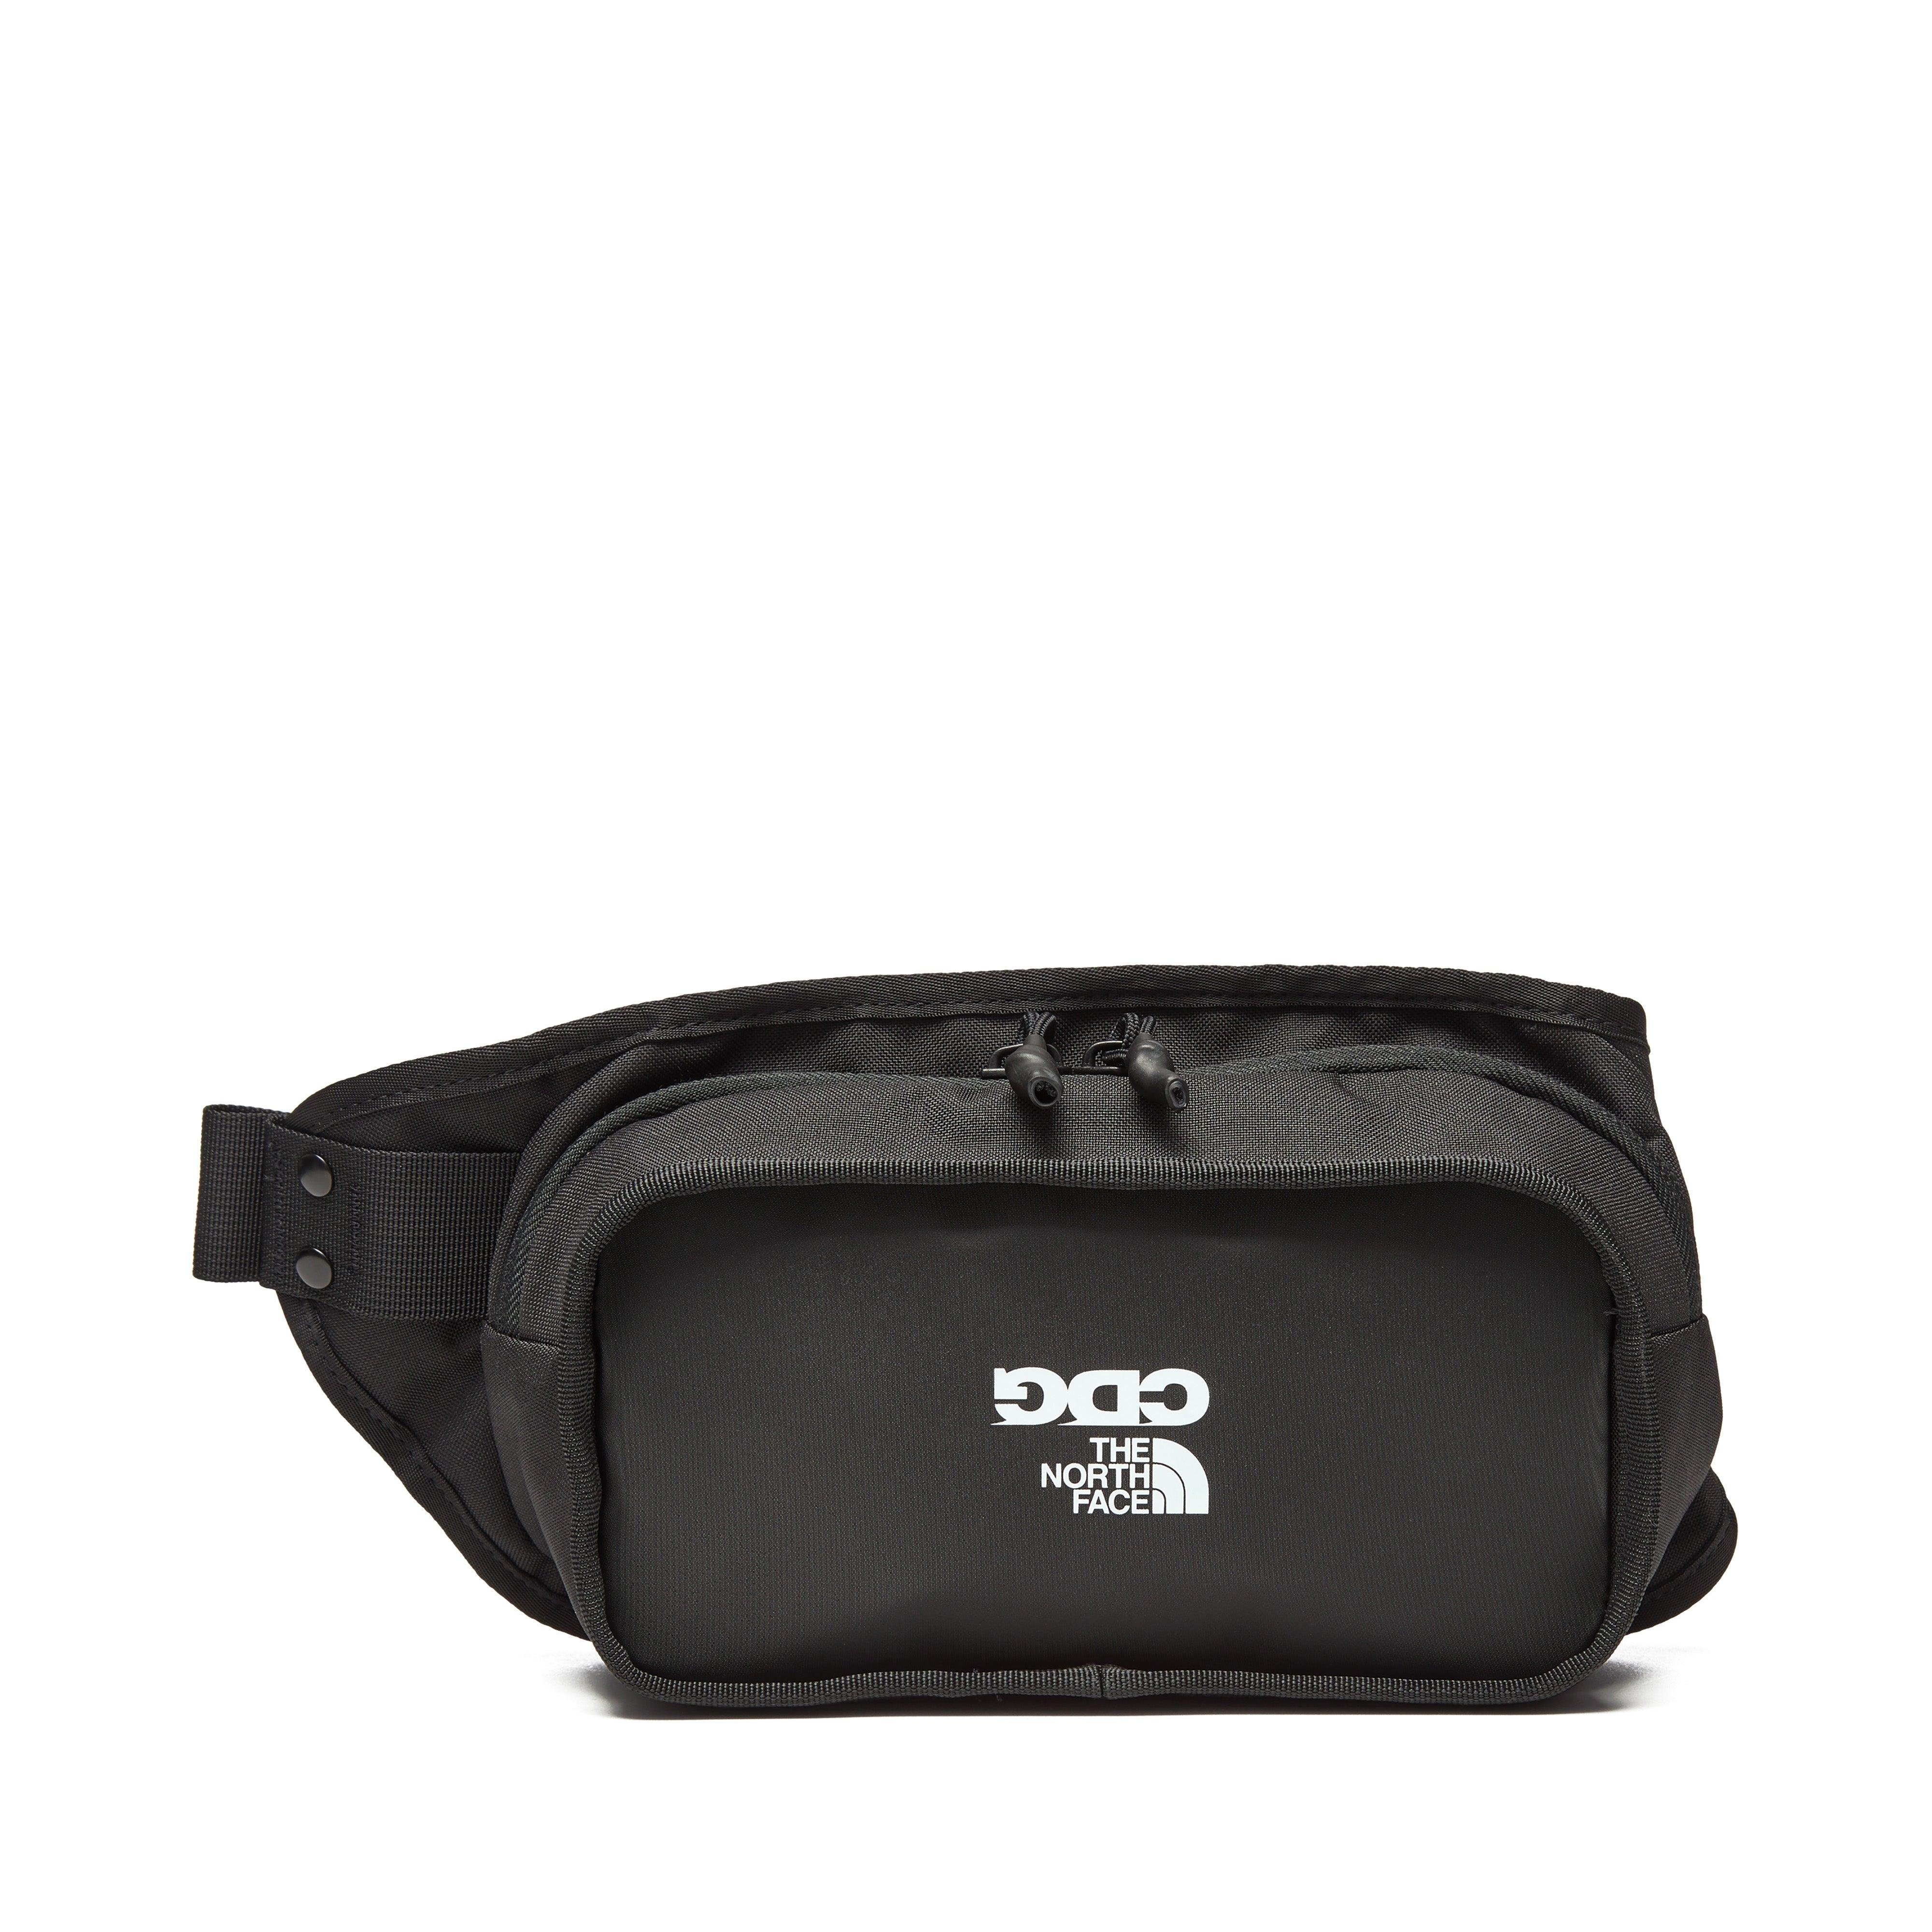 CDG - The North Face Explore Hip Pack - (Black) by COMME DES